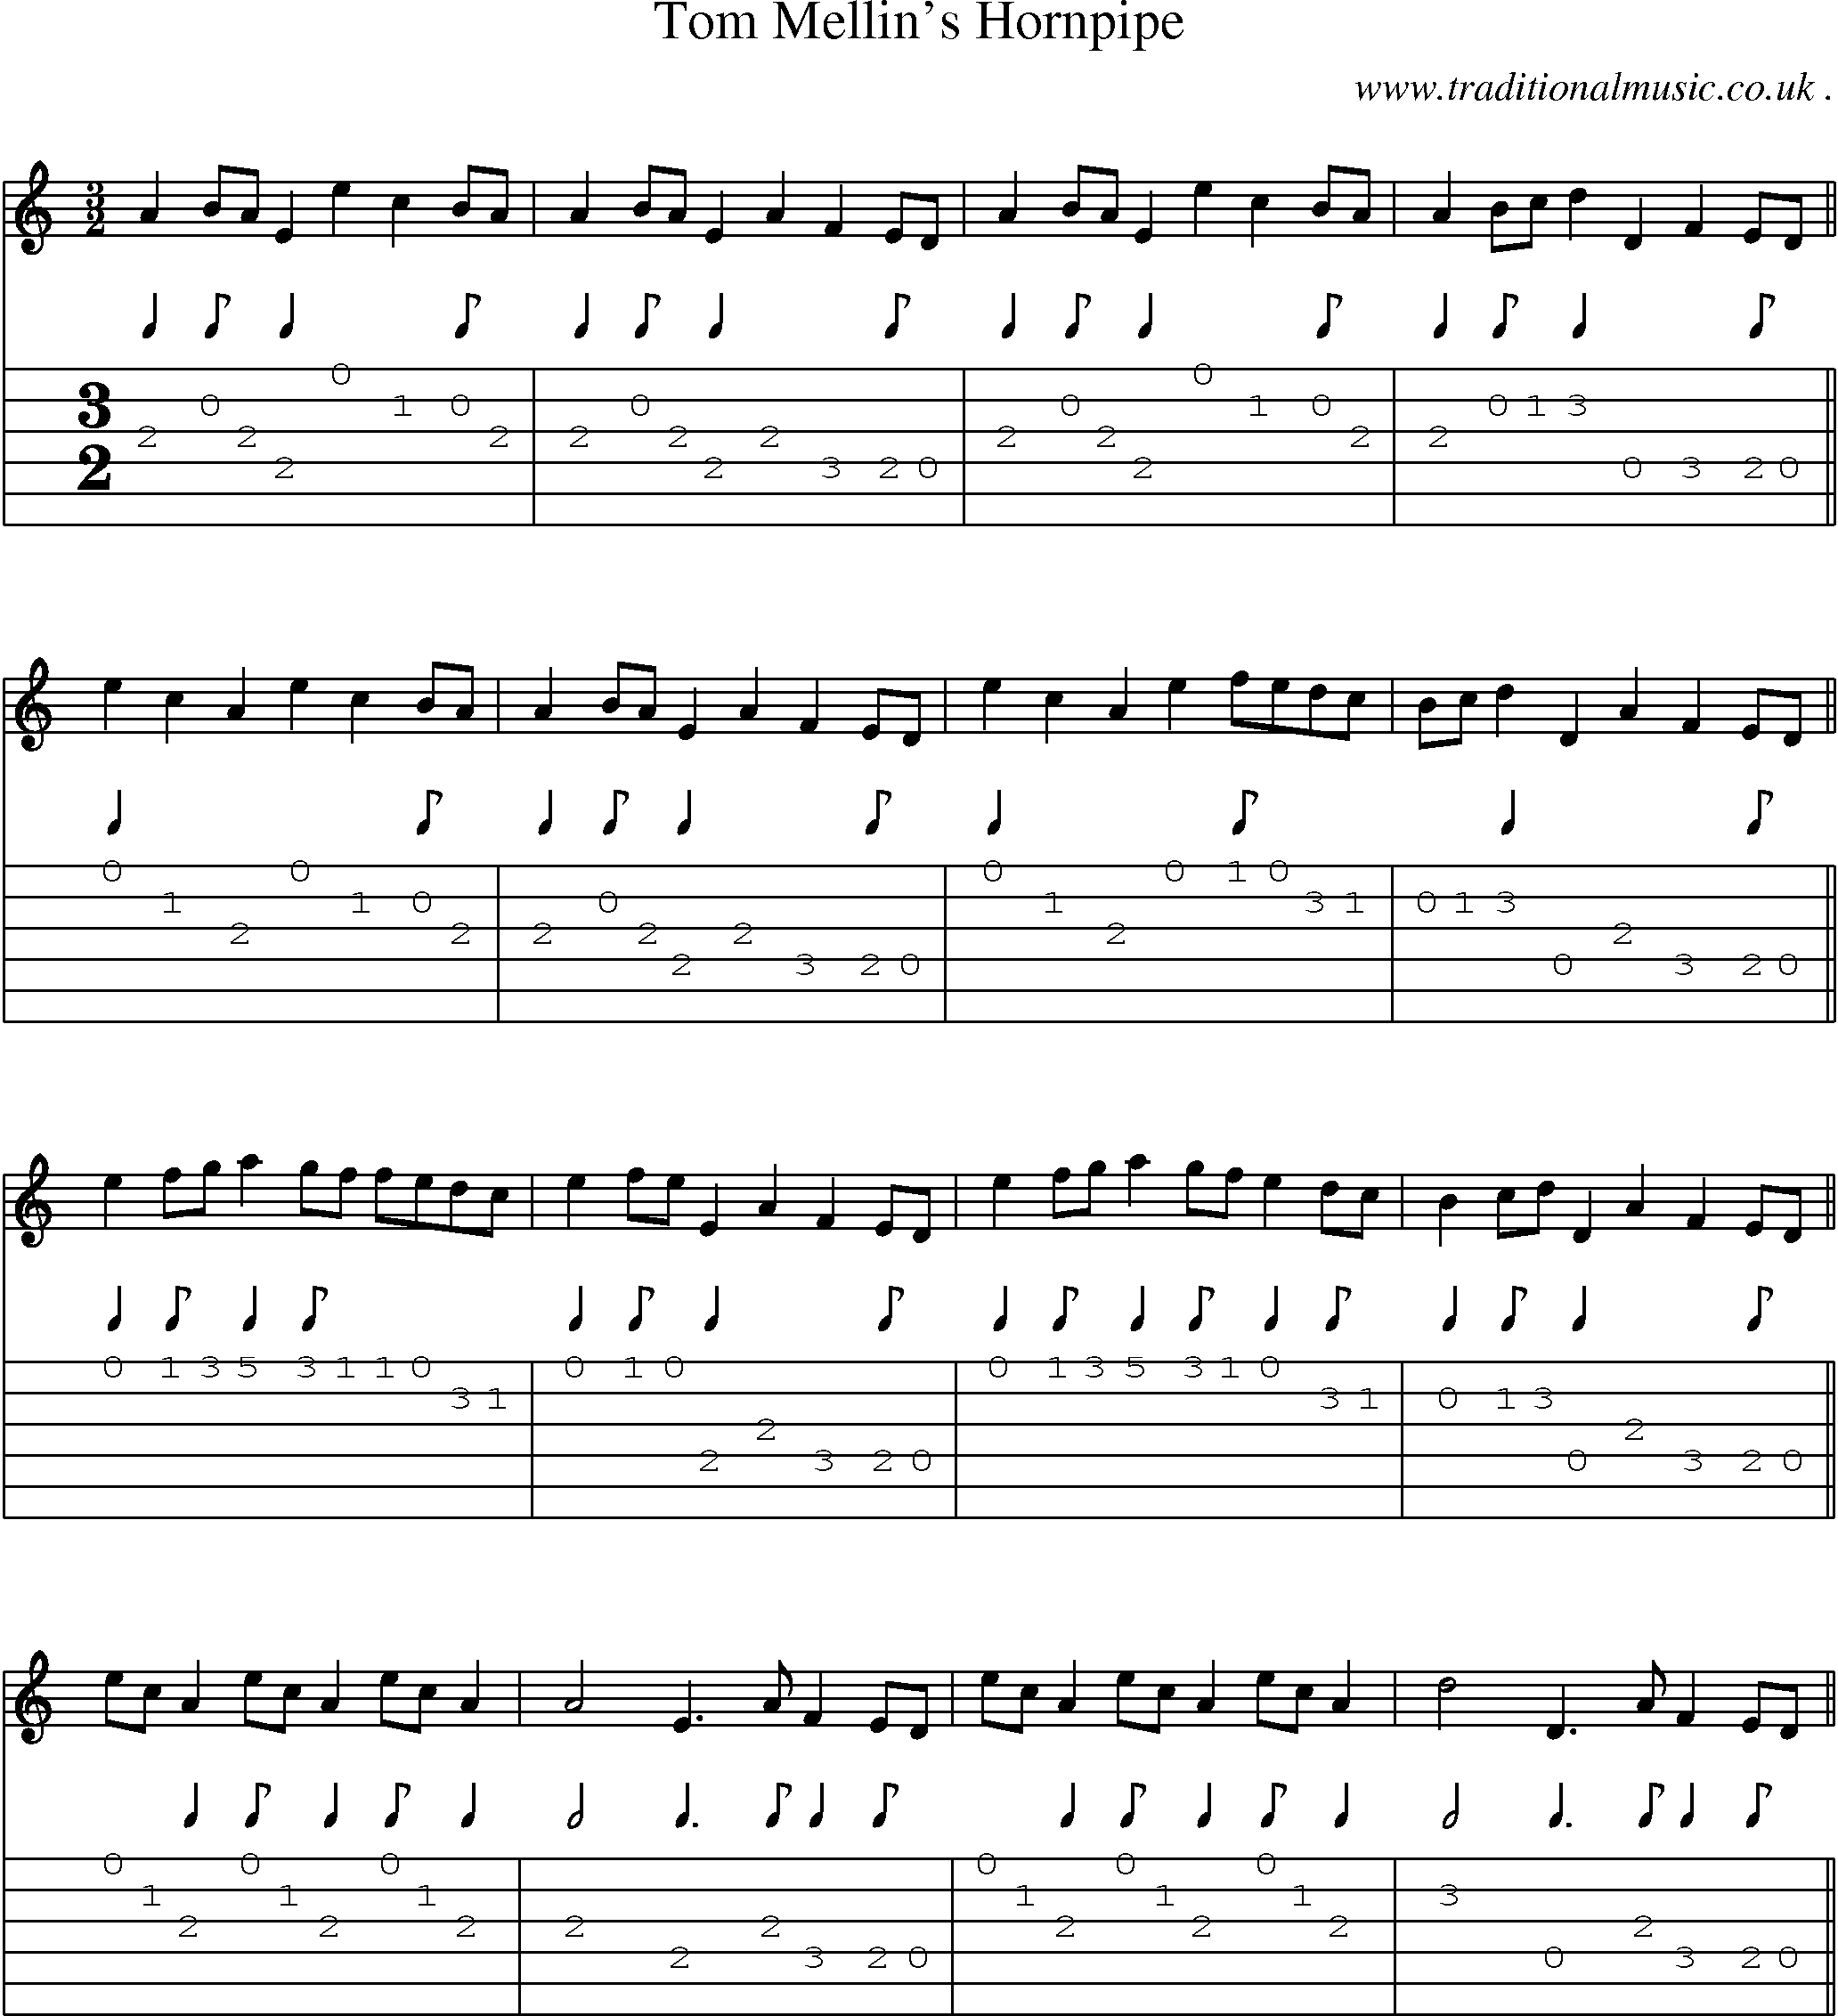 Sheet-Music and Guitar Tabs for Tom Mellins Hornpipe